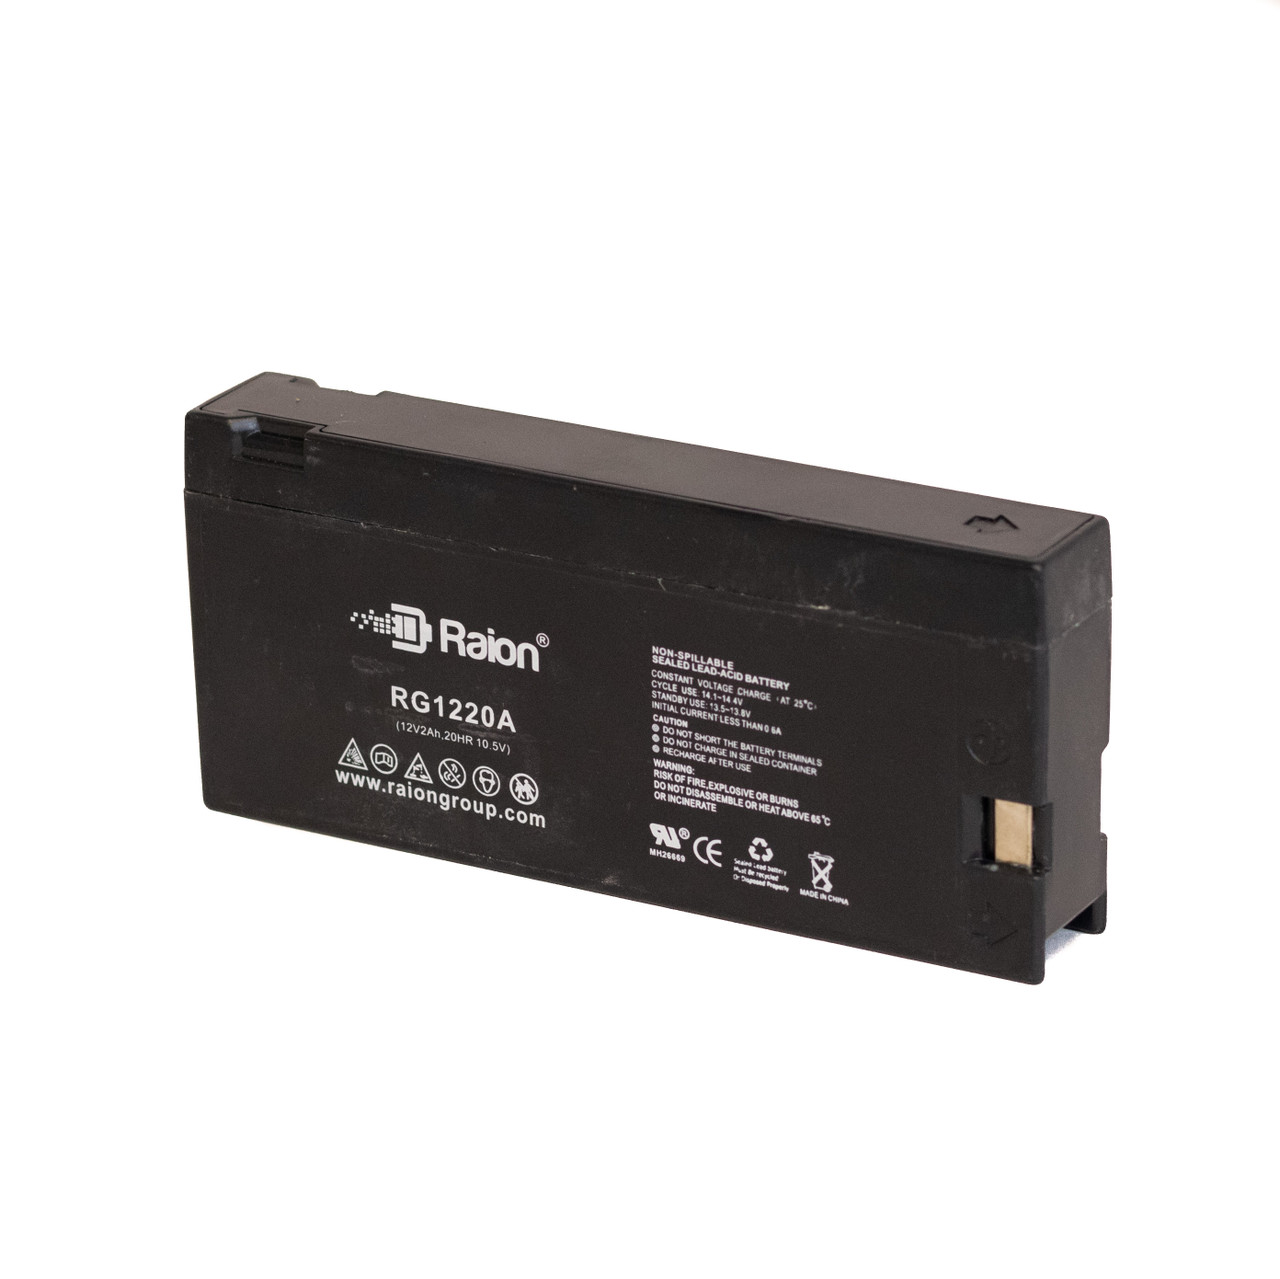 Raion Power RG1220A Replacement Battery for Magnavox CVM-720